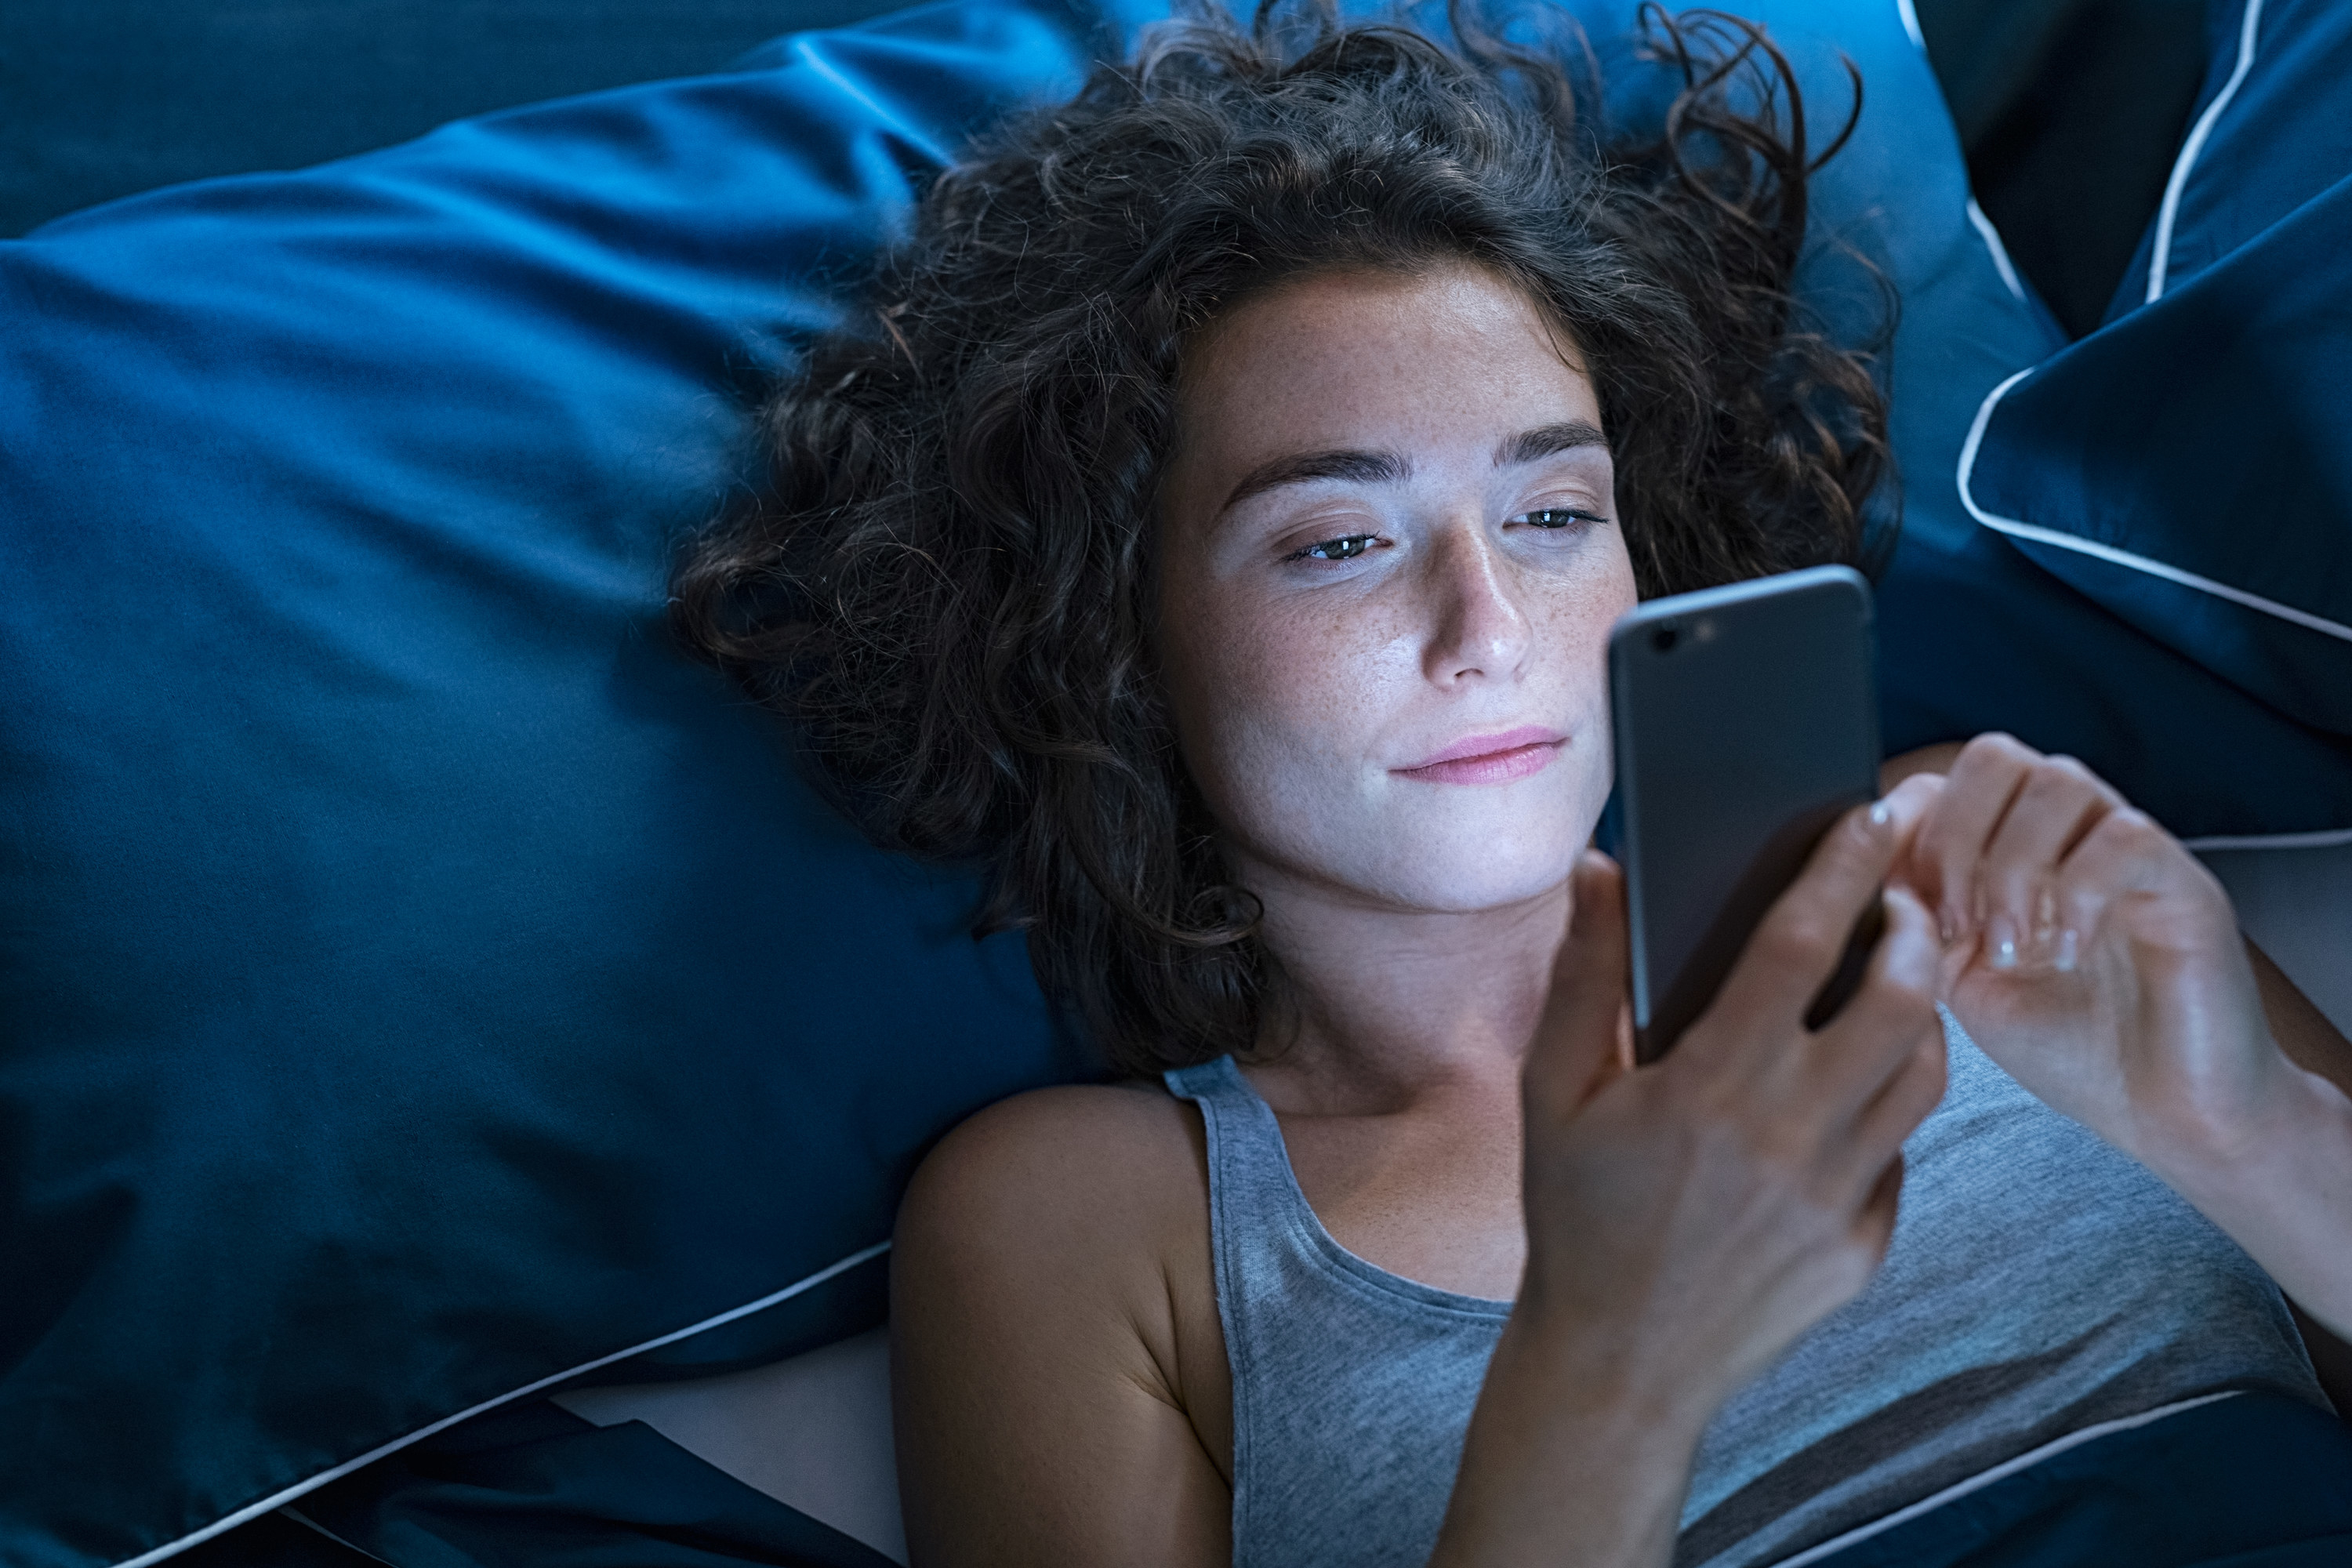 person using a phone in bed